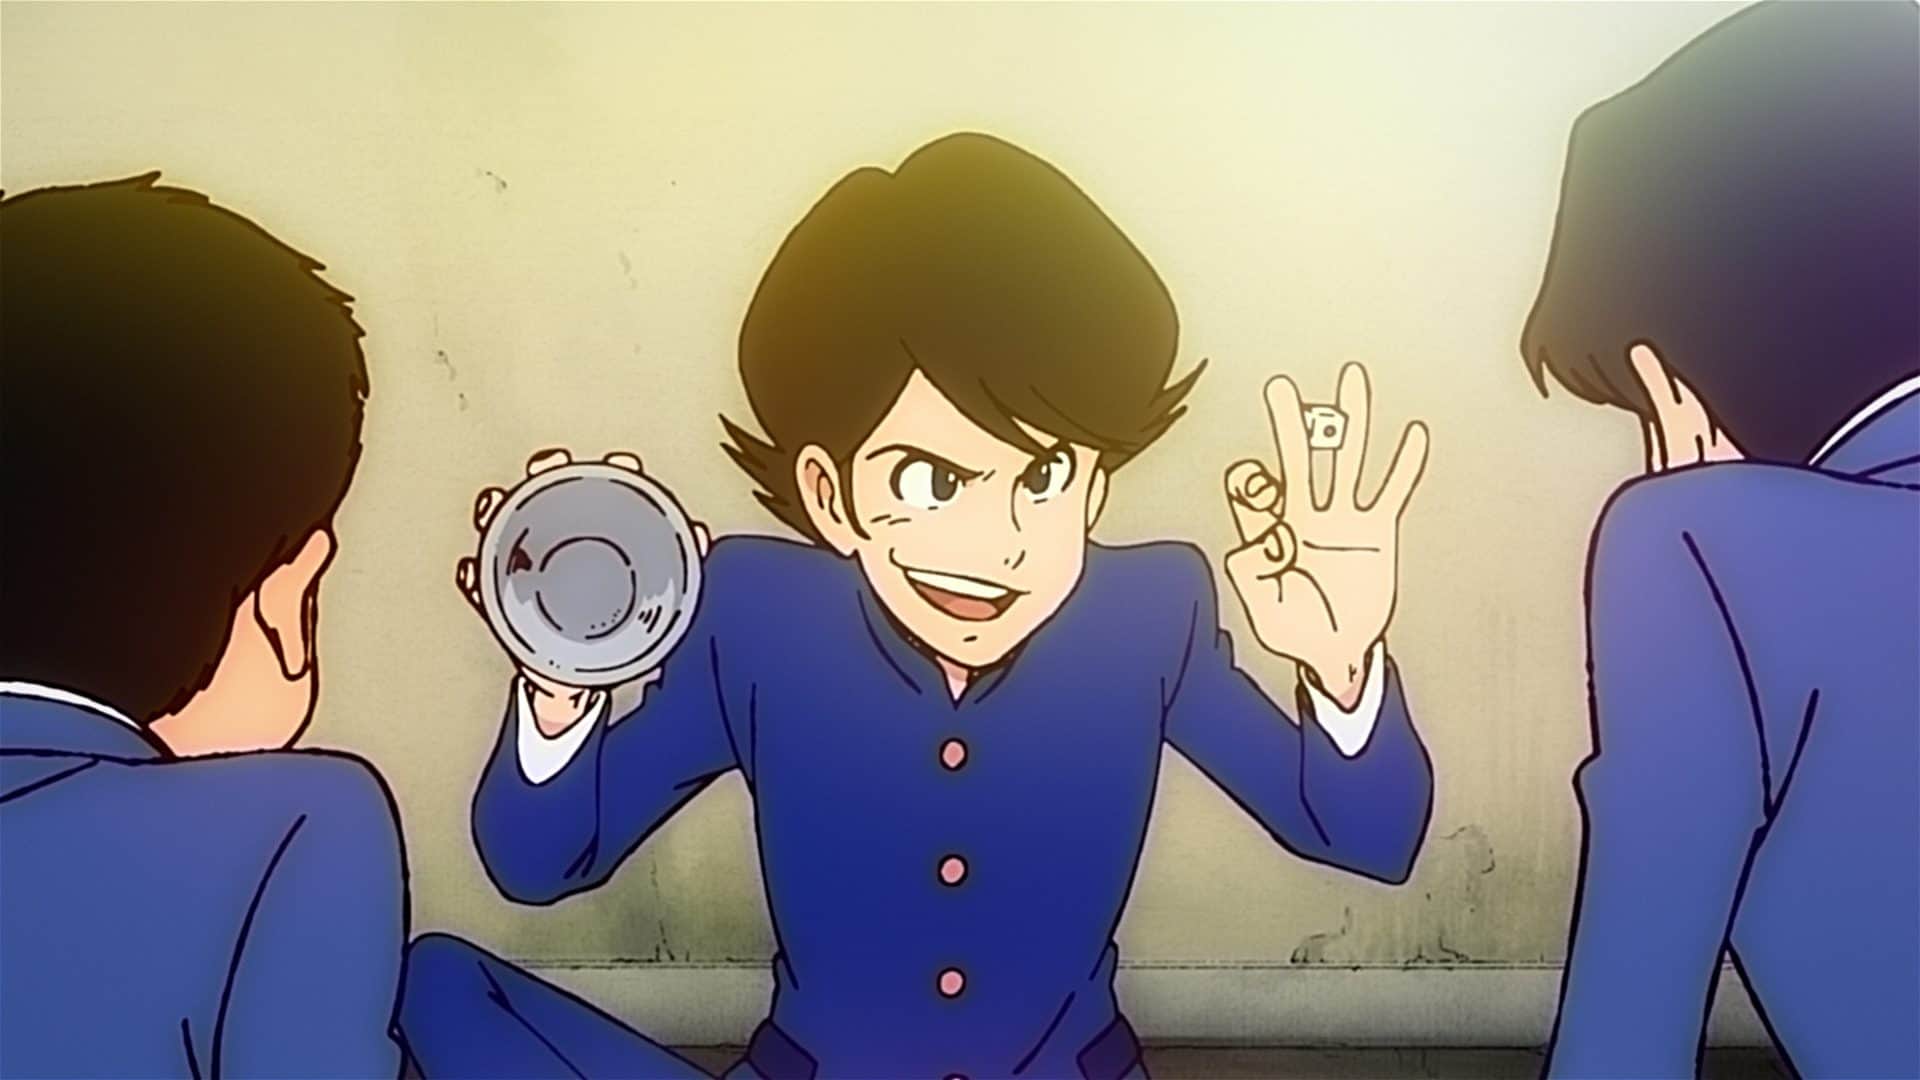 Lupin Zero Episode Schedule and details